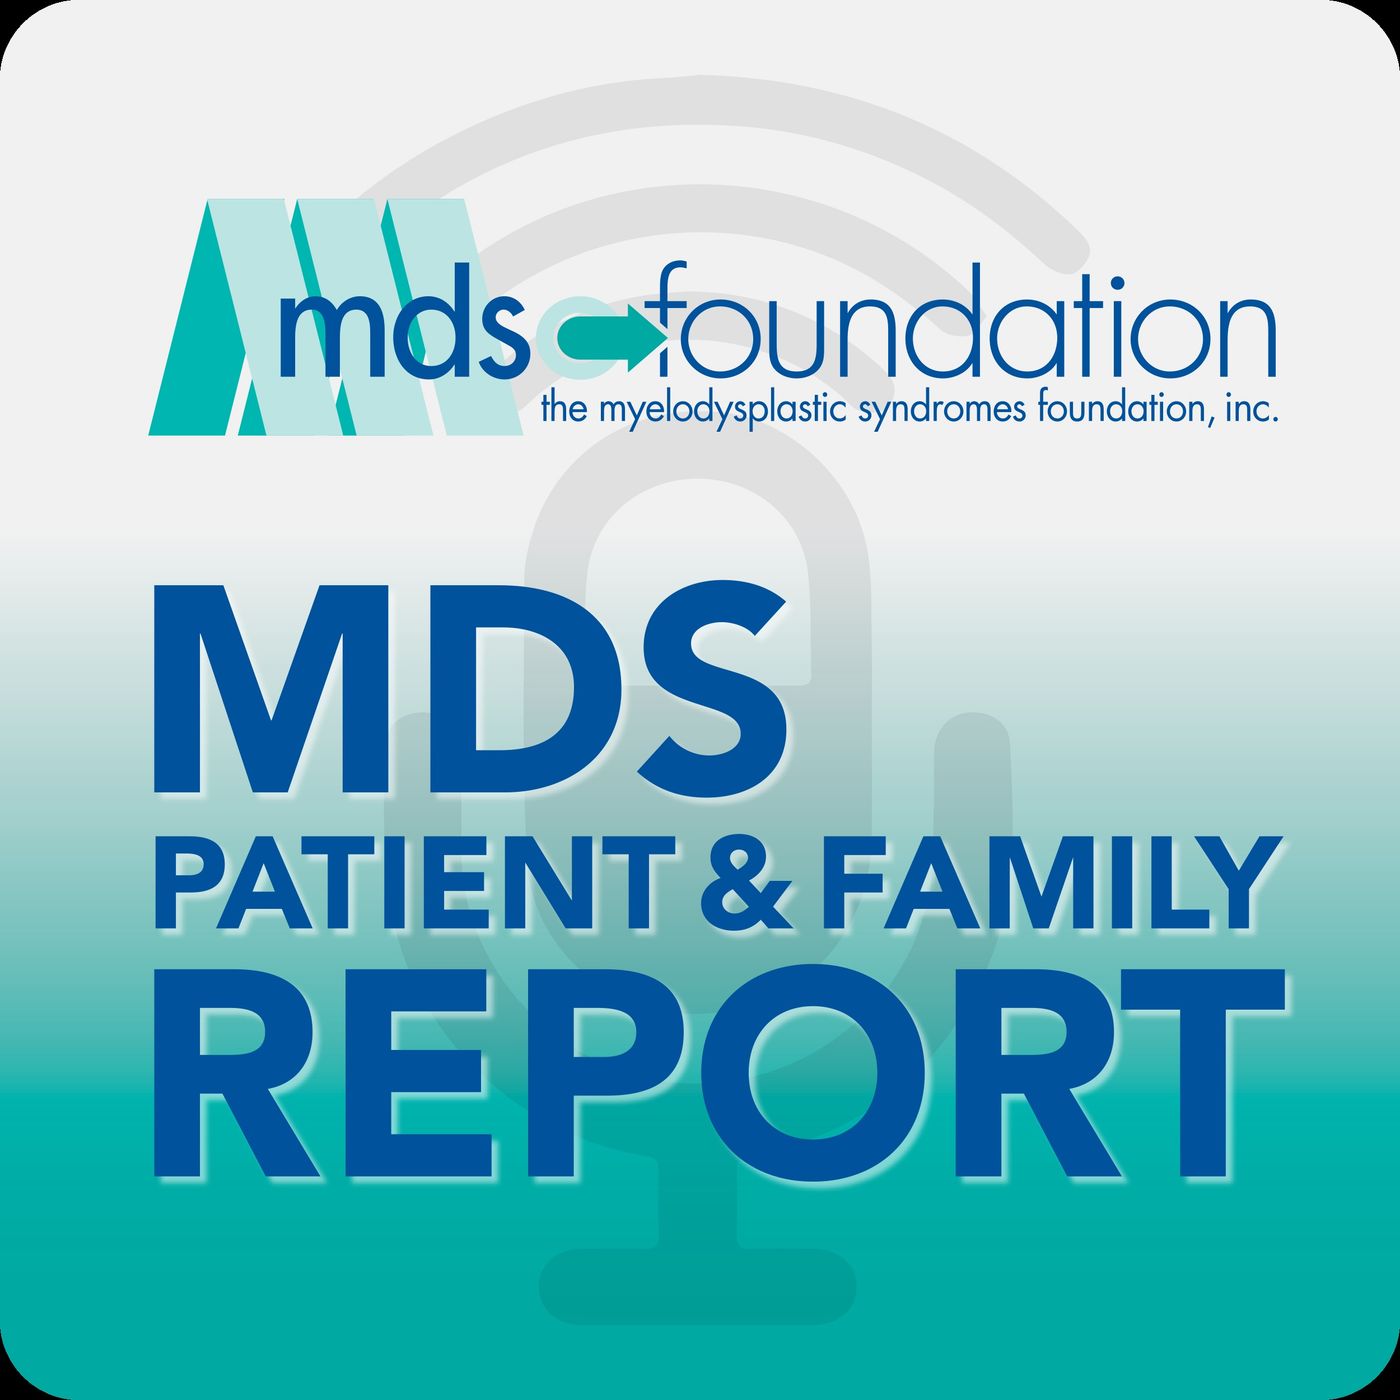 Blood transfusions and quality of life in MDS [MDS Patient & Family Report]